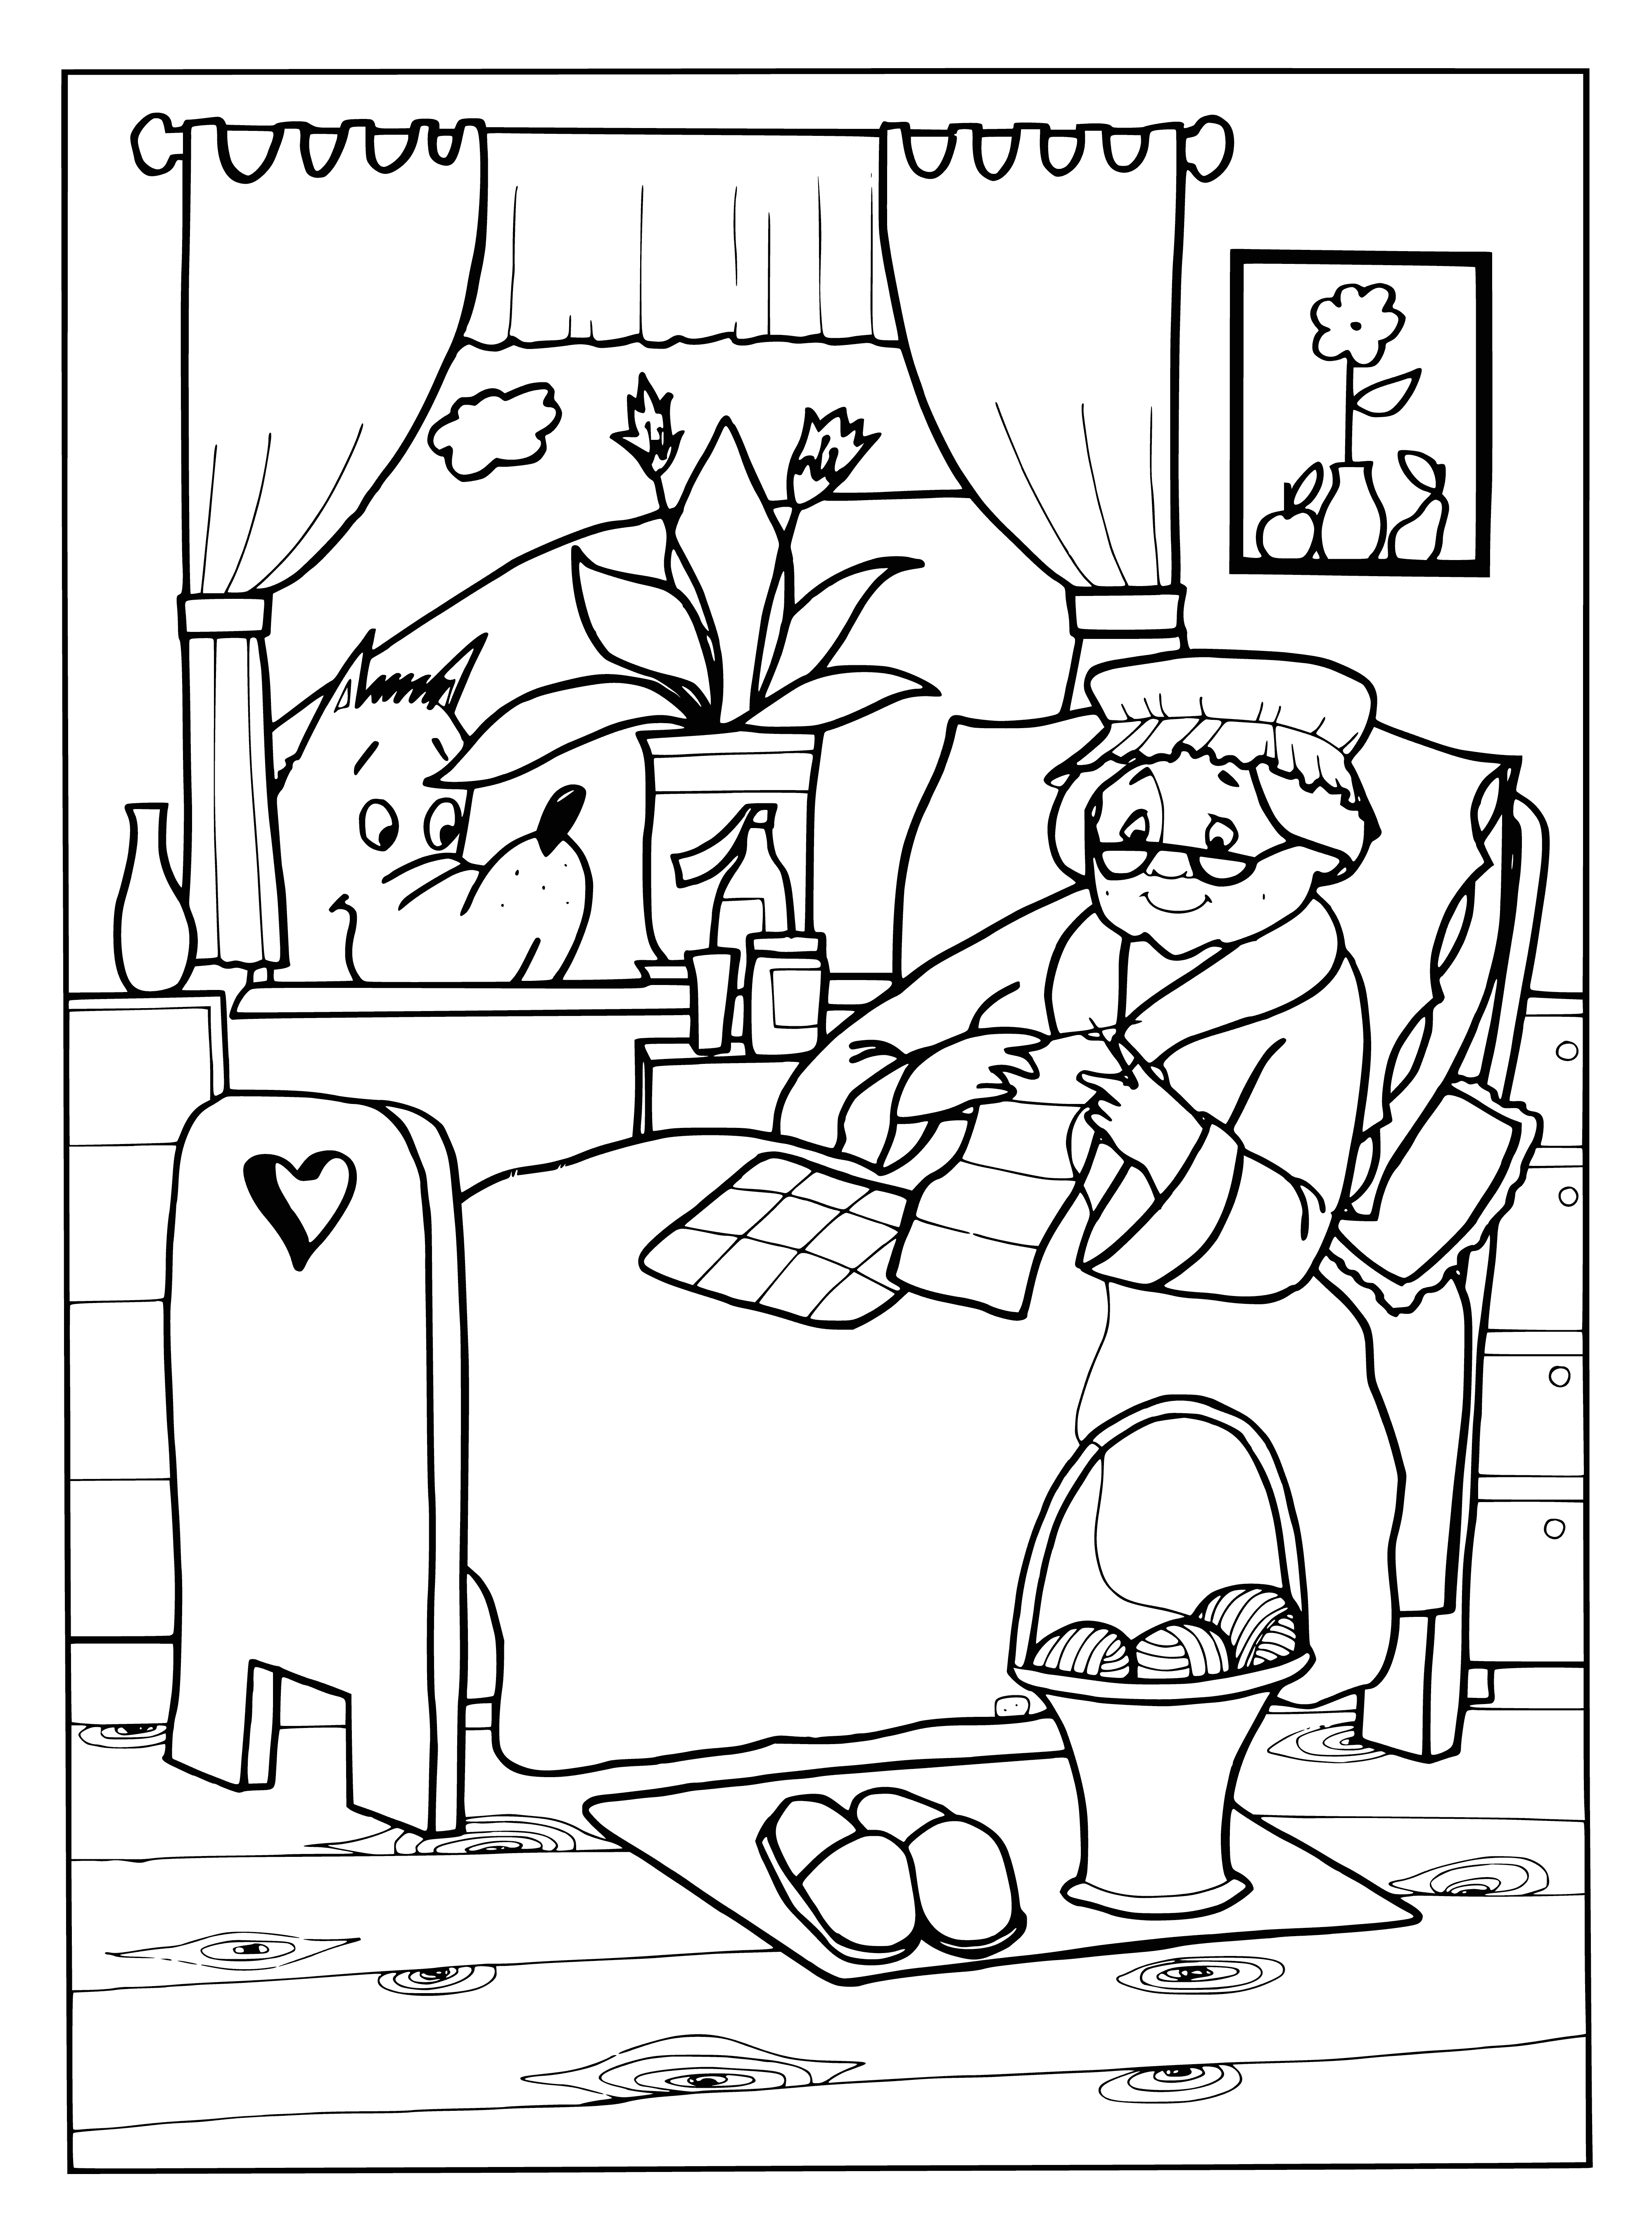 coloring page: Grandma sits in a rocking chair, knitting; ball of yarn at her feet, basket of yarn beside. Blue dress/white apron, white hair, glasses. Happy & content.